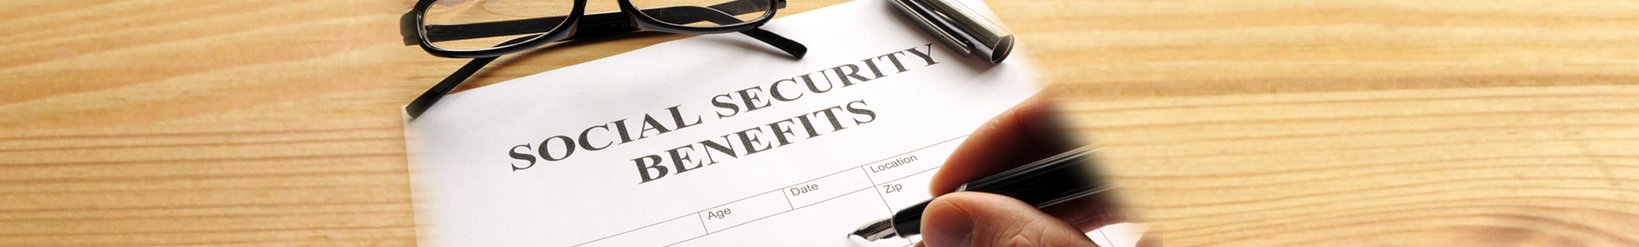 Social Security Disability Benefits for a Hearing Impairment (Page 1)